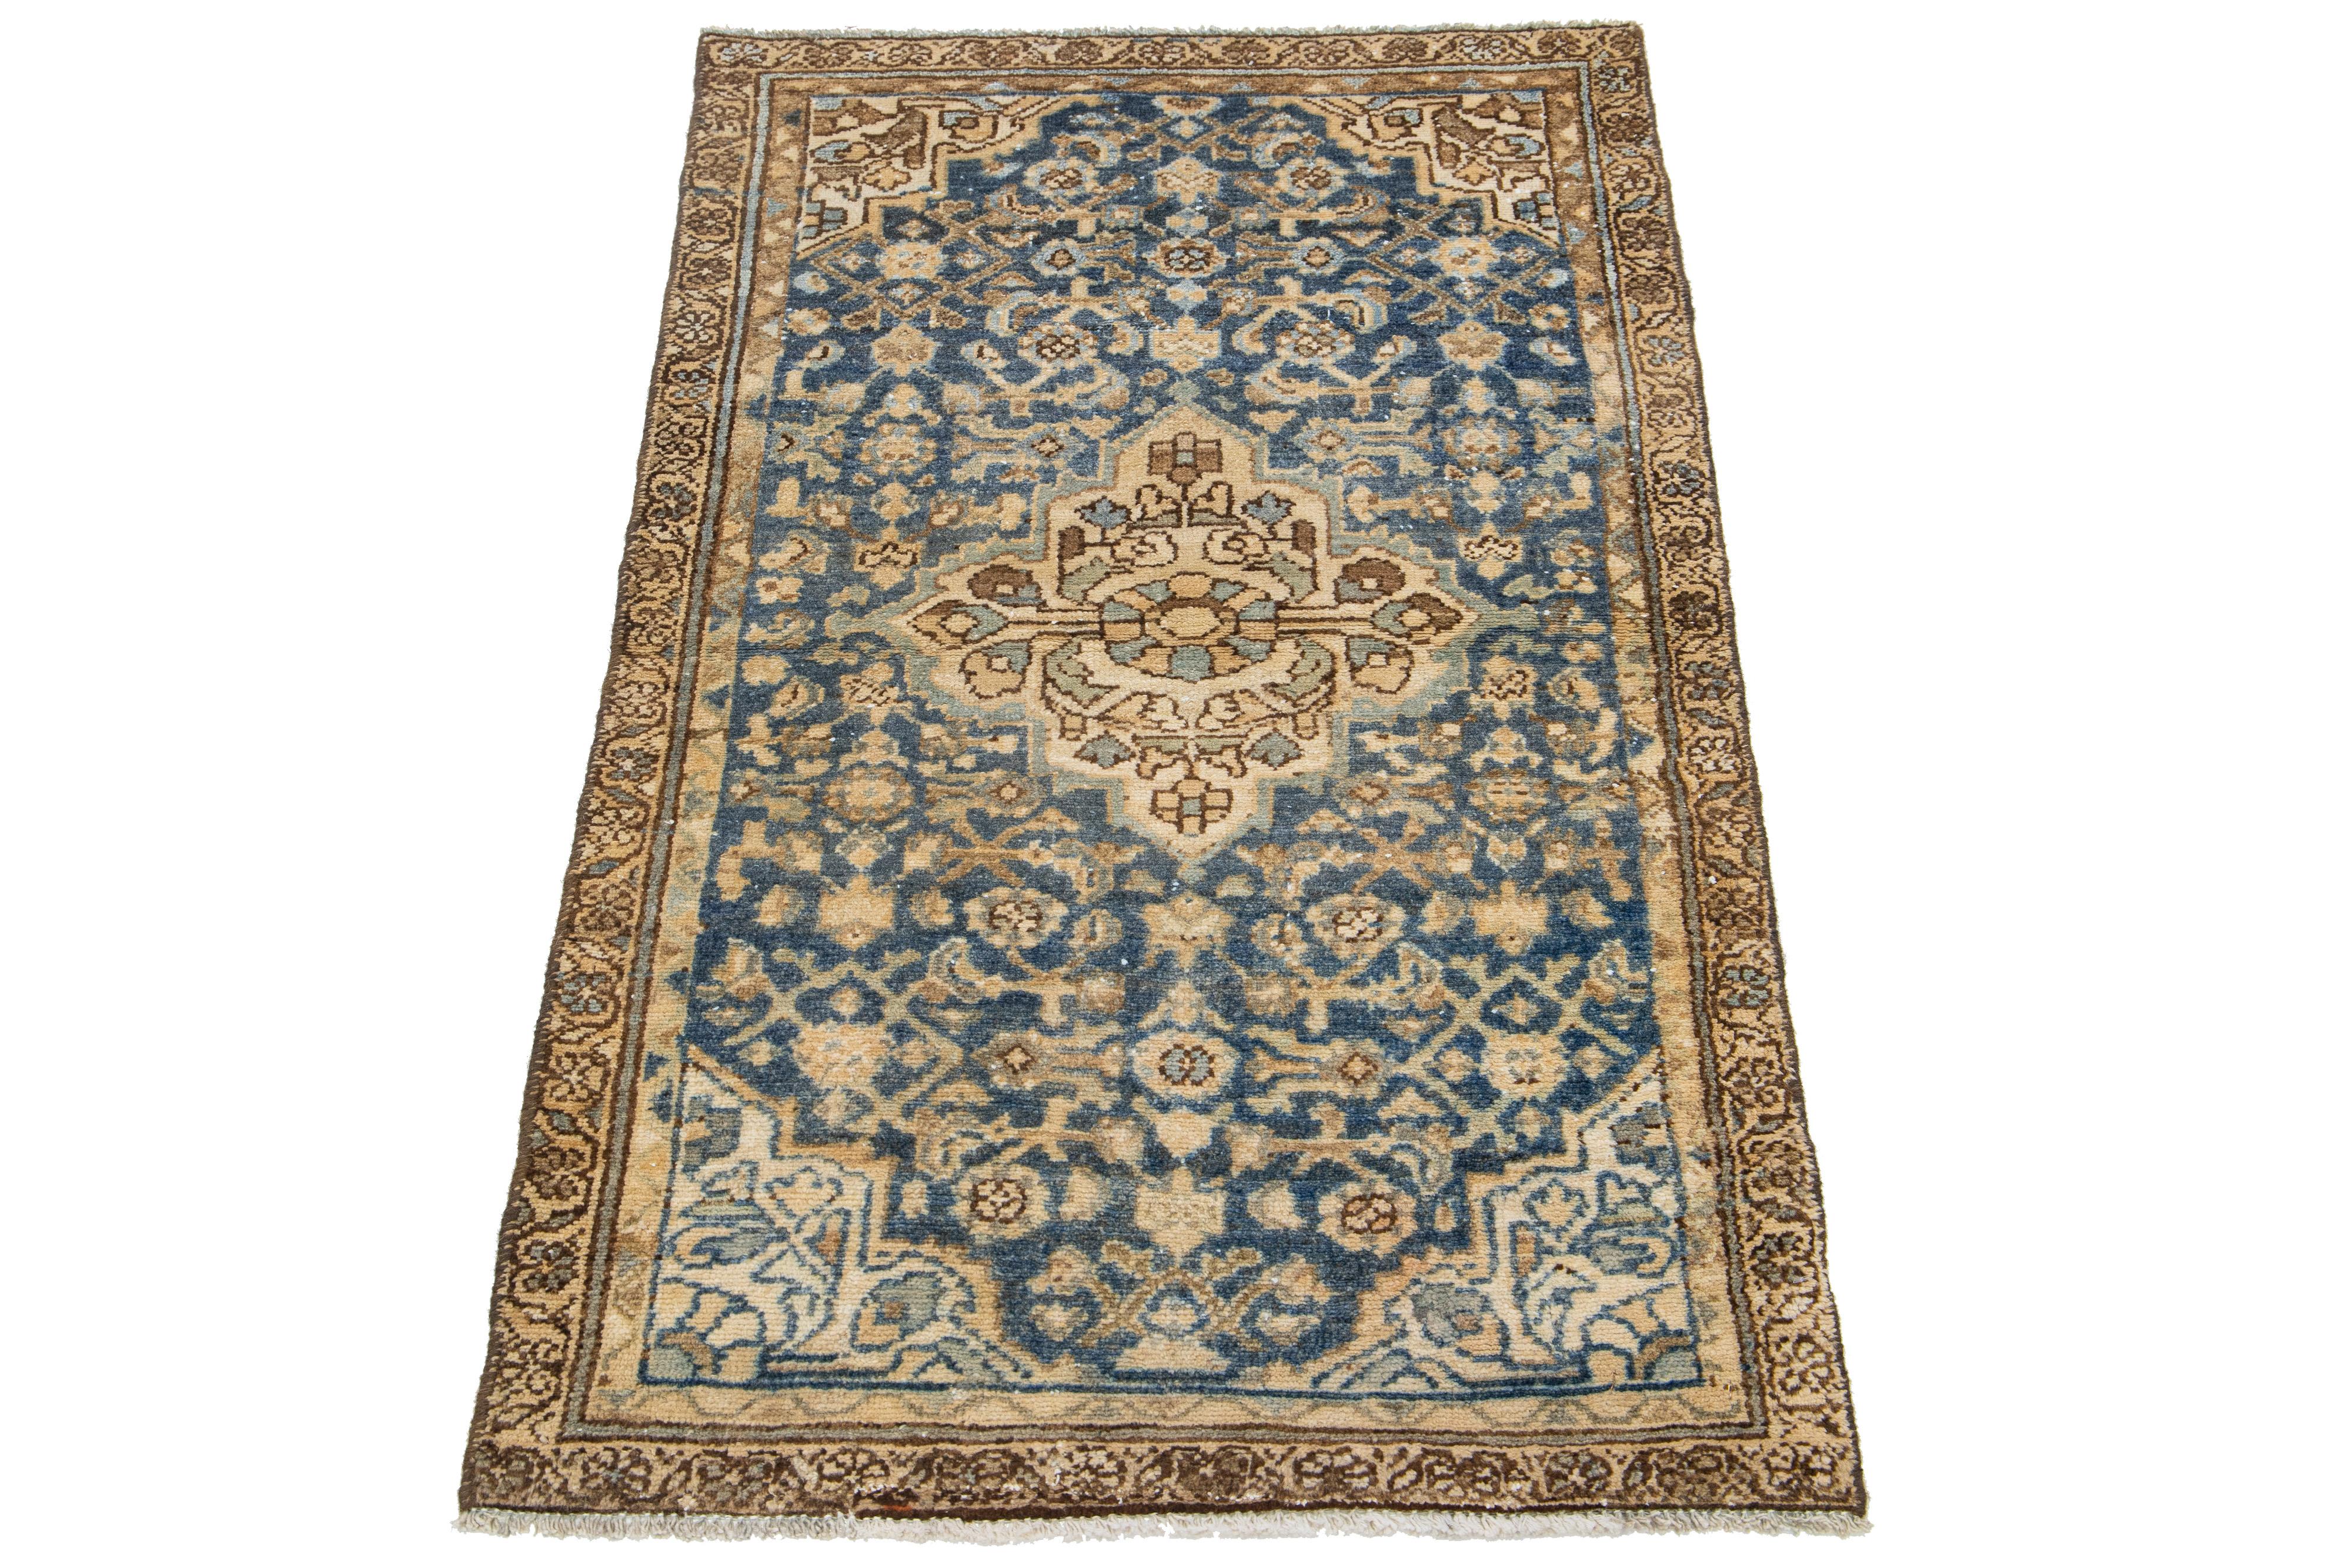 This antique Hamadan rug is hand-knotted from premium wool, boasting a blue field complemented by a captivating, all-over pattern design with beige accents.

This rug measures 2'4